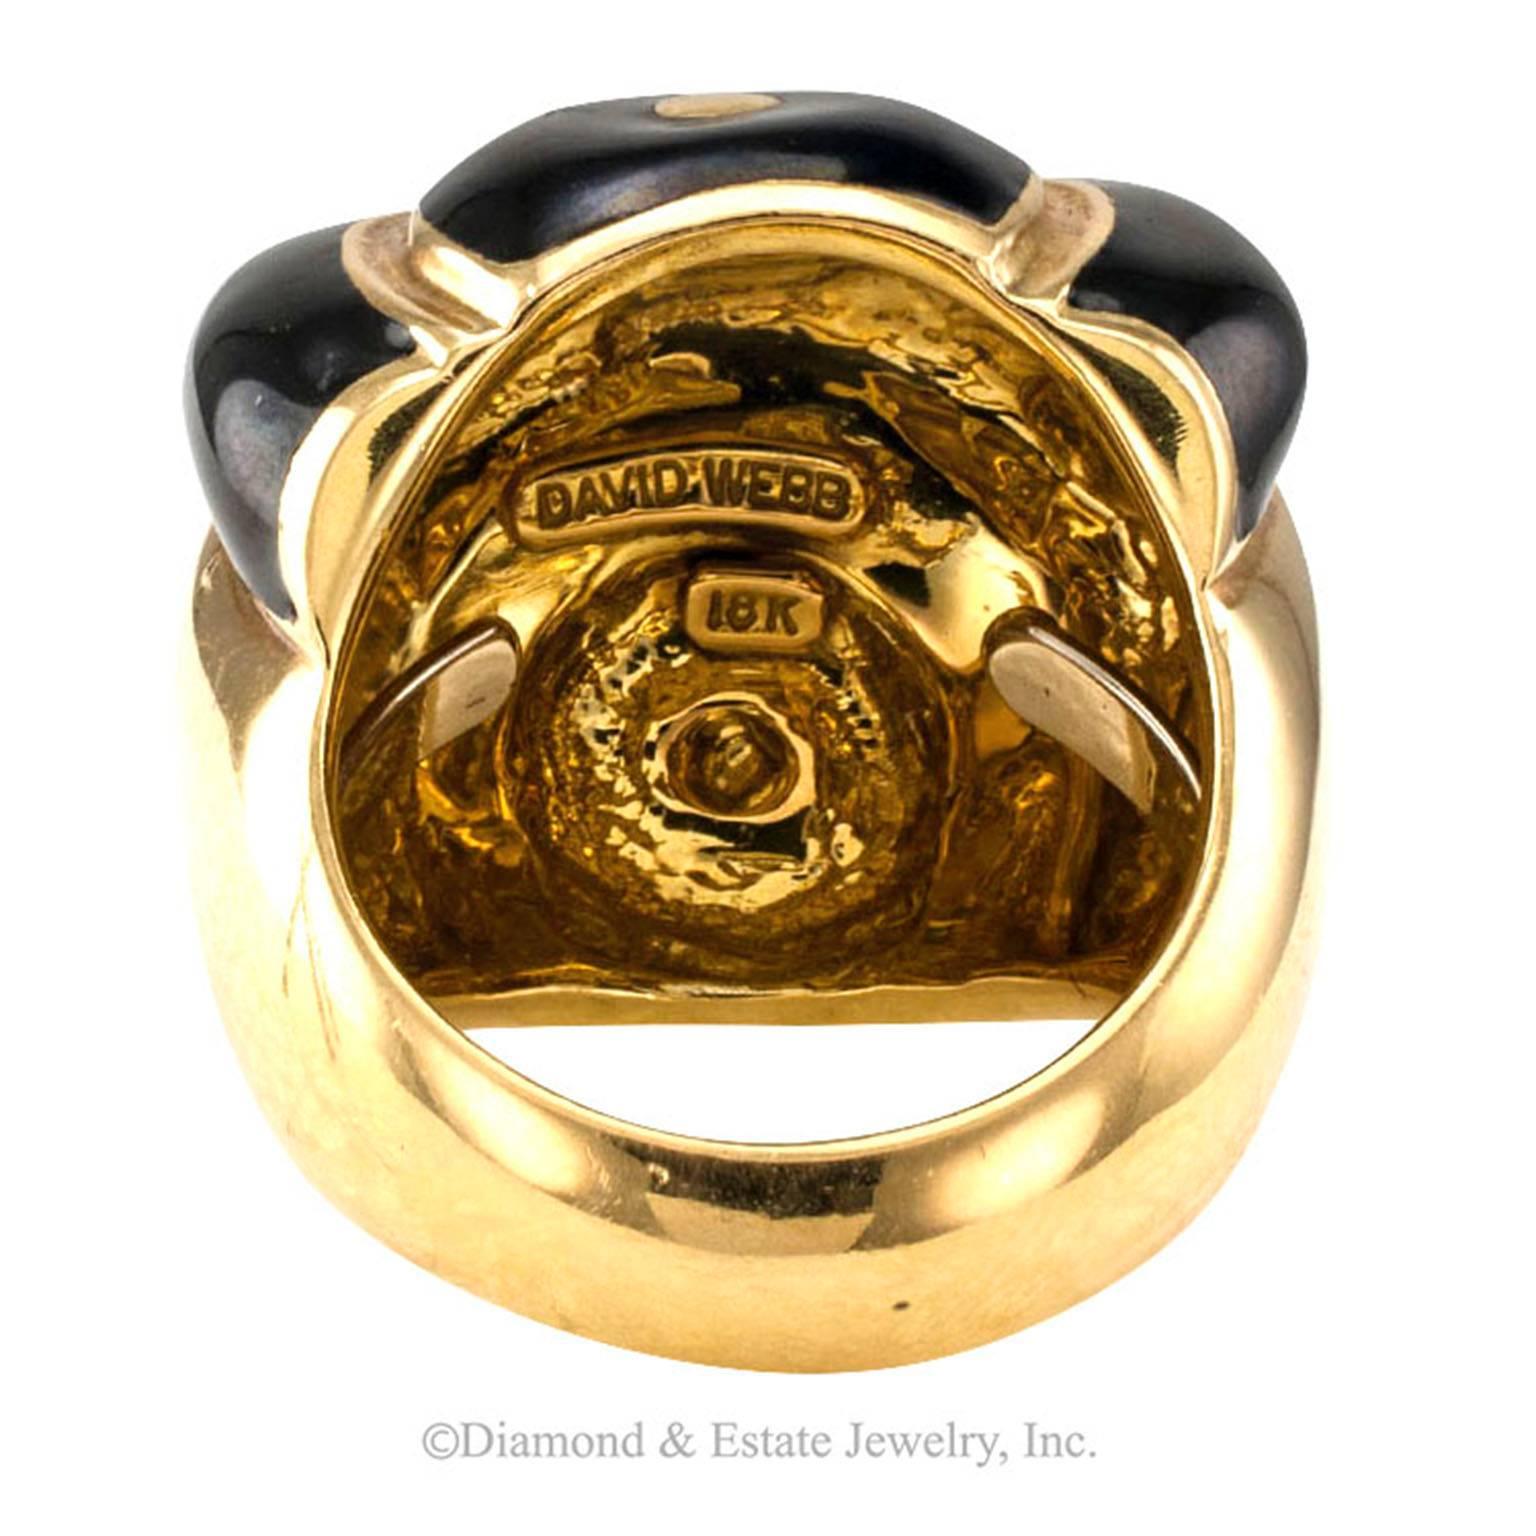 David Webb Black Enamel and Gold Ring

A very cool whimsical take on an abstract motif endowed with all those wonderful qualities that make owning a David Webb jewel such a delight.   Just knowing that it is Webb, David Webb, is thrilling... a